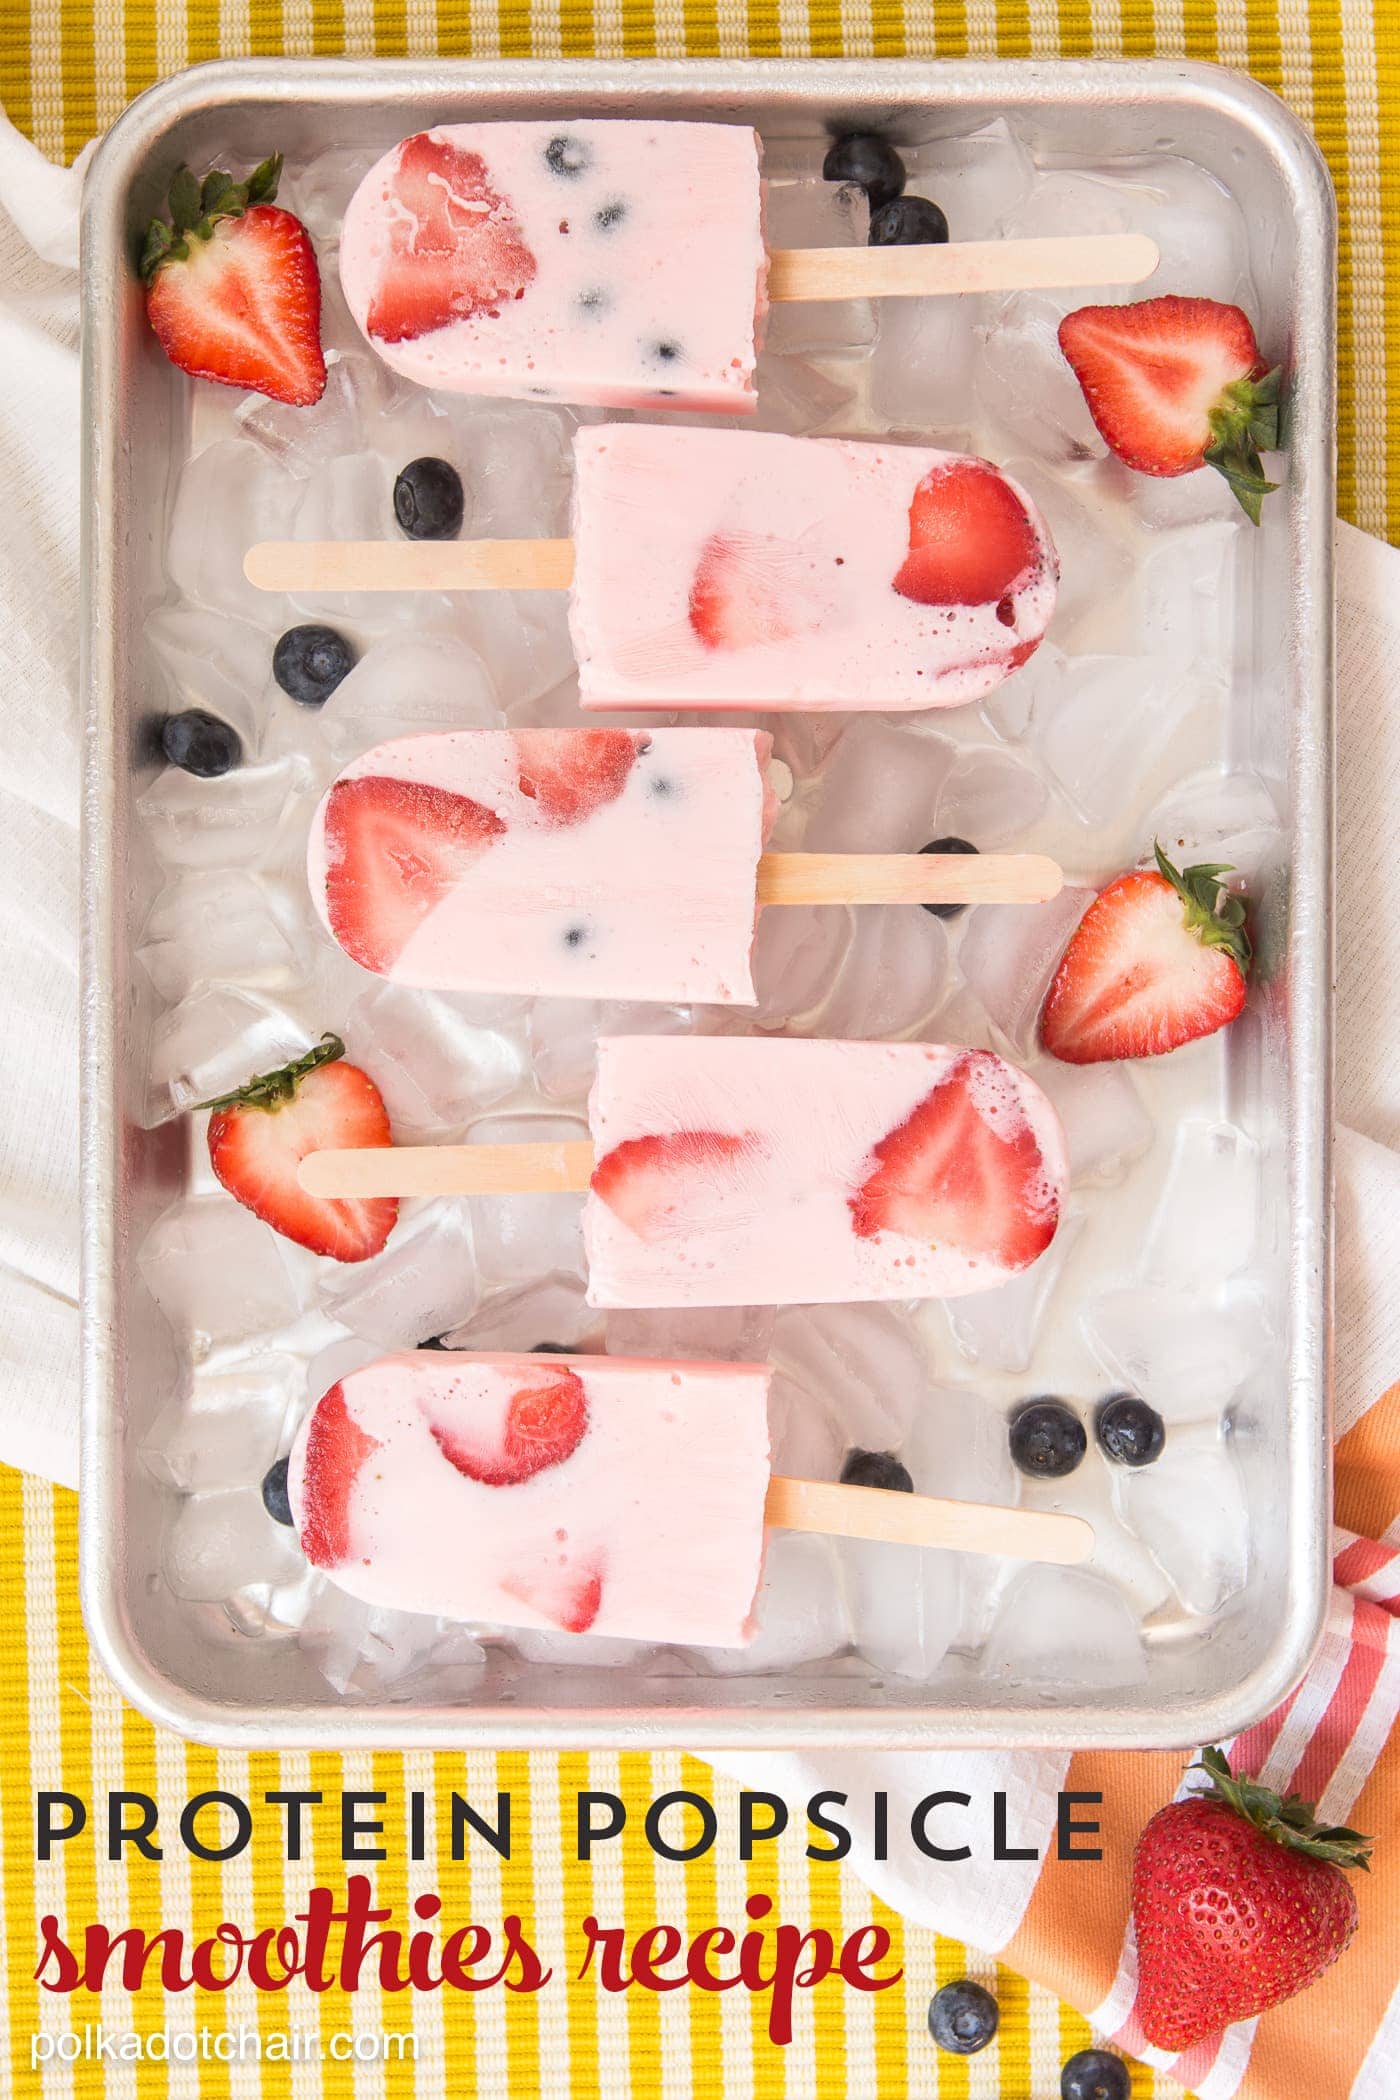 Protein Smoothie Popsicle Recipe & Back to School Sweepstakes